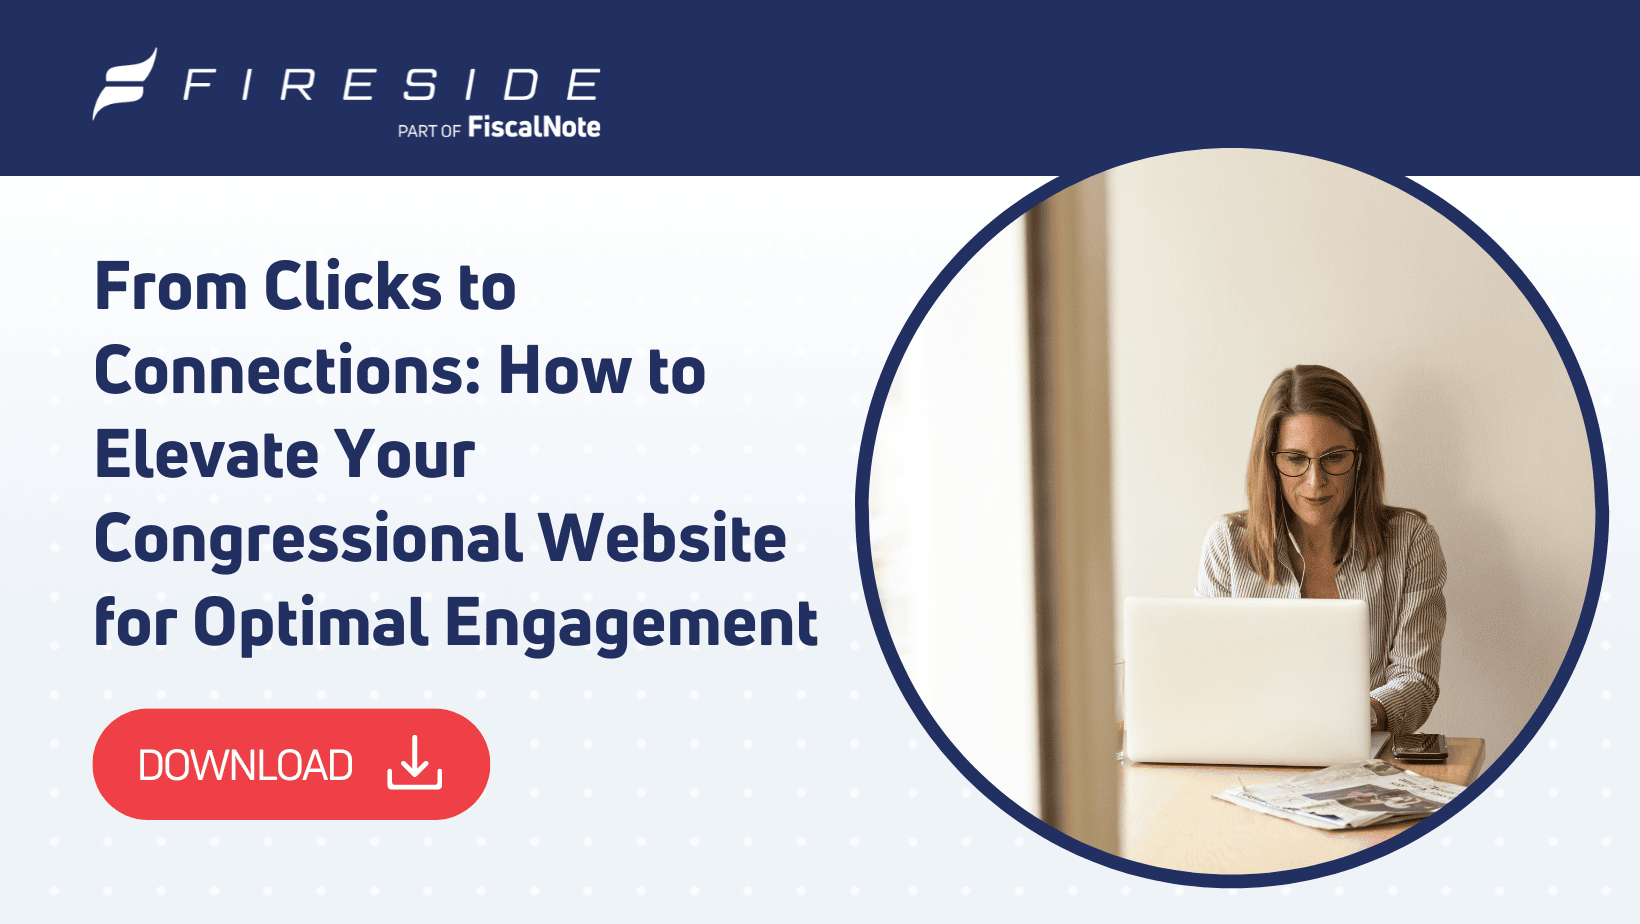 From Clicks to Connections: How to Elevate Your Congressional Website for Optimal Engagement